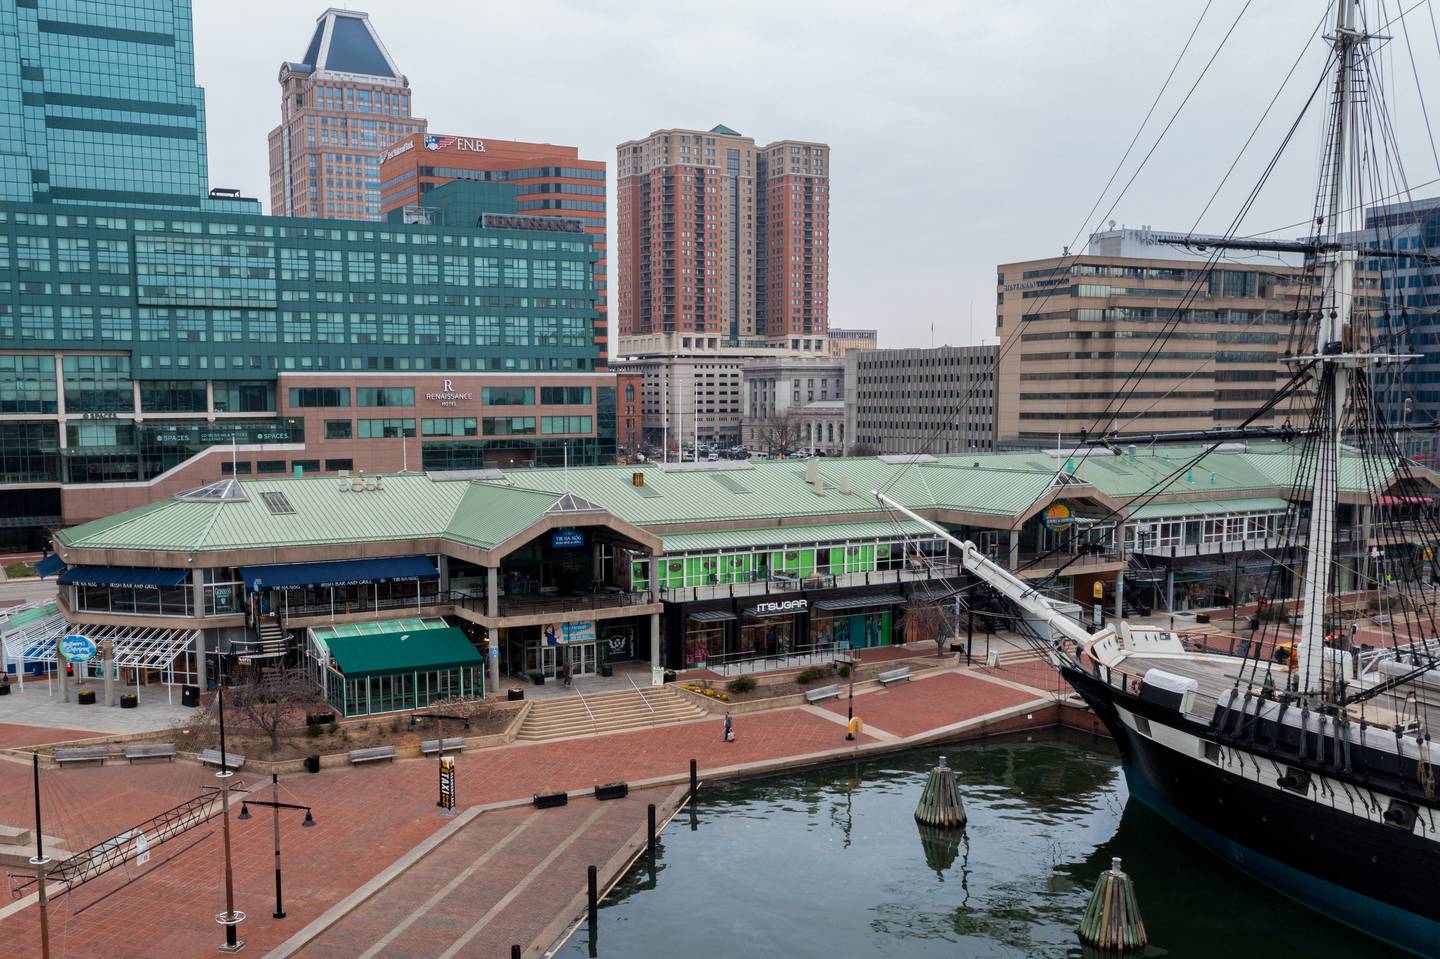 A view of Baltimore's Inner Harbor and historic ship taken with a drone on Friday, March 17. Several property and business owners say they have concerns about the low levels of foot traffic in the district, which they need to stay in business.